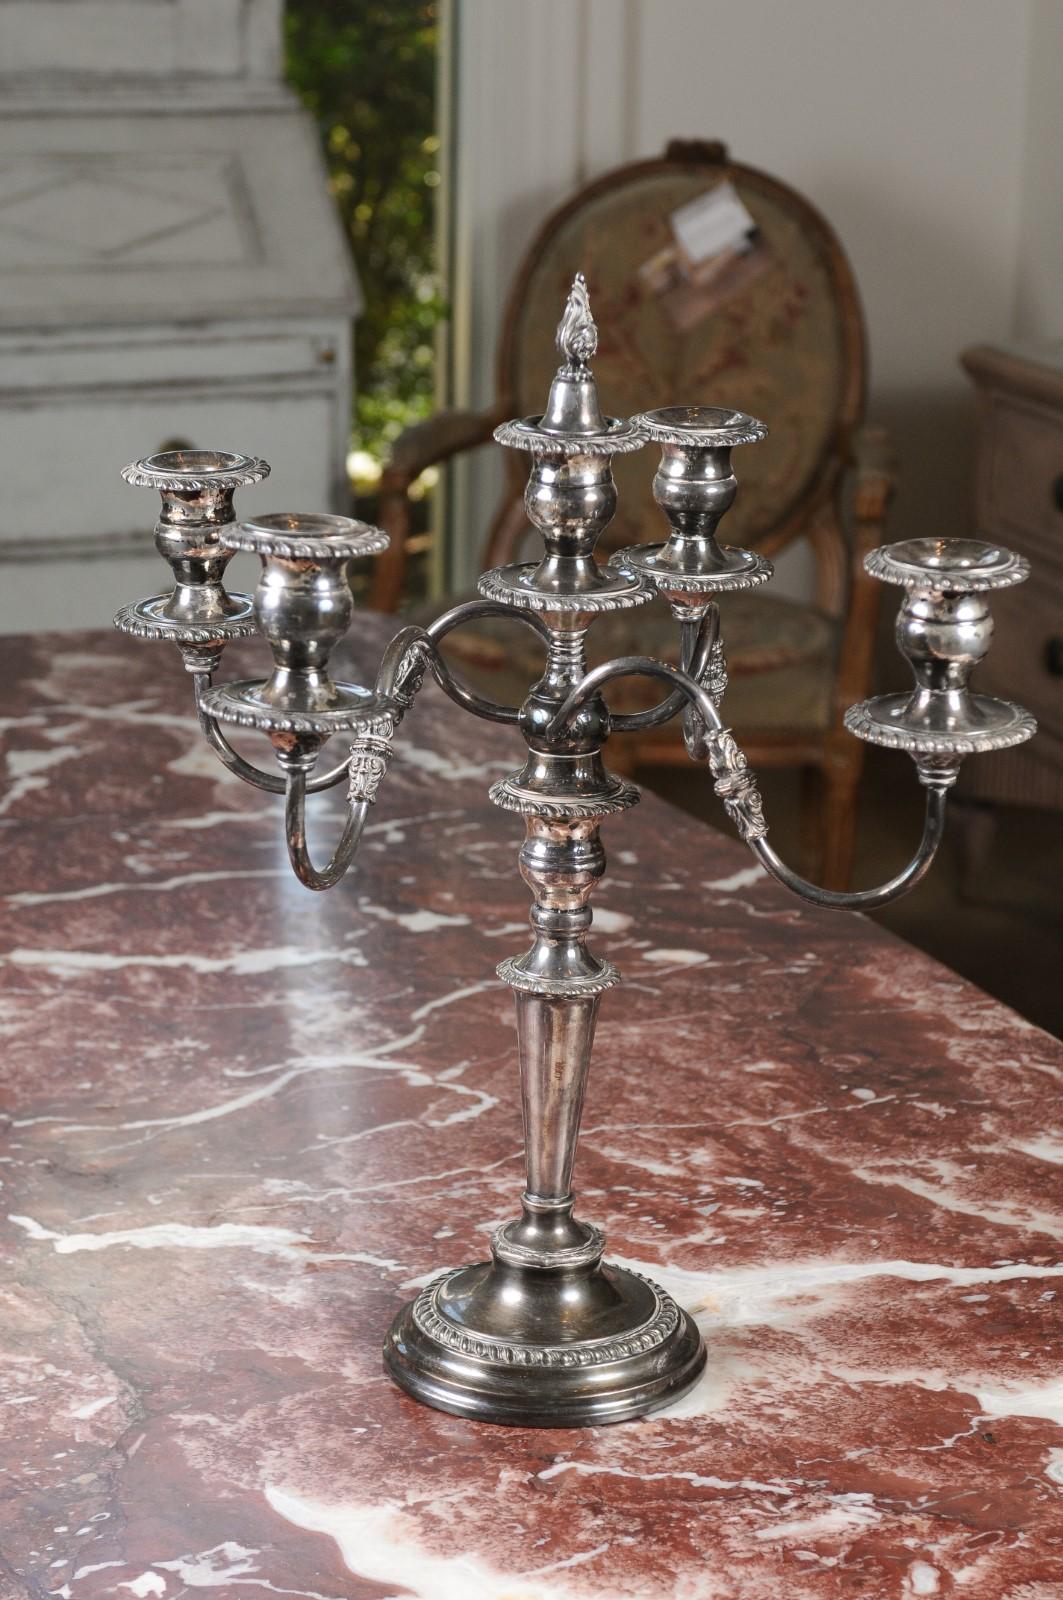 American Silver Plated Four-Arm Candelabra with Foliage and Scrolling Accents 4